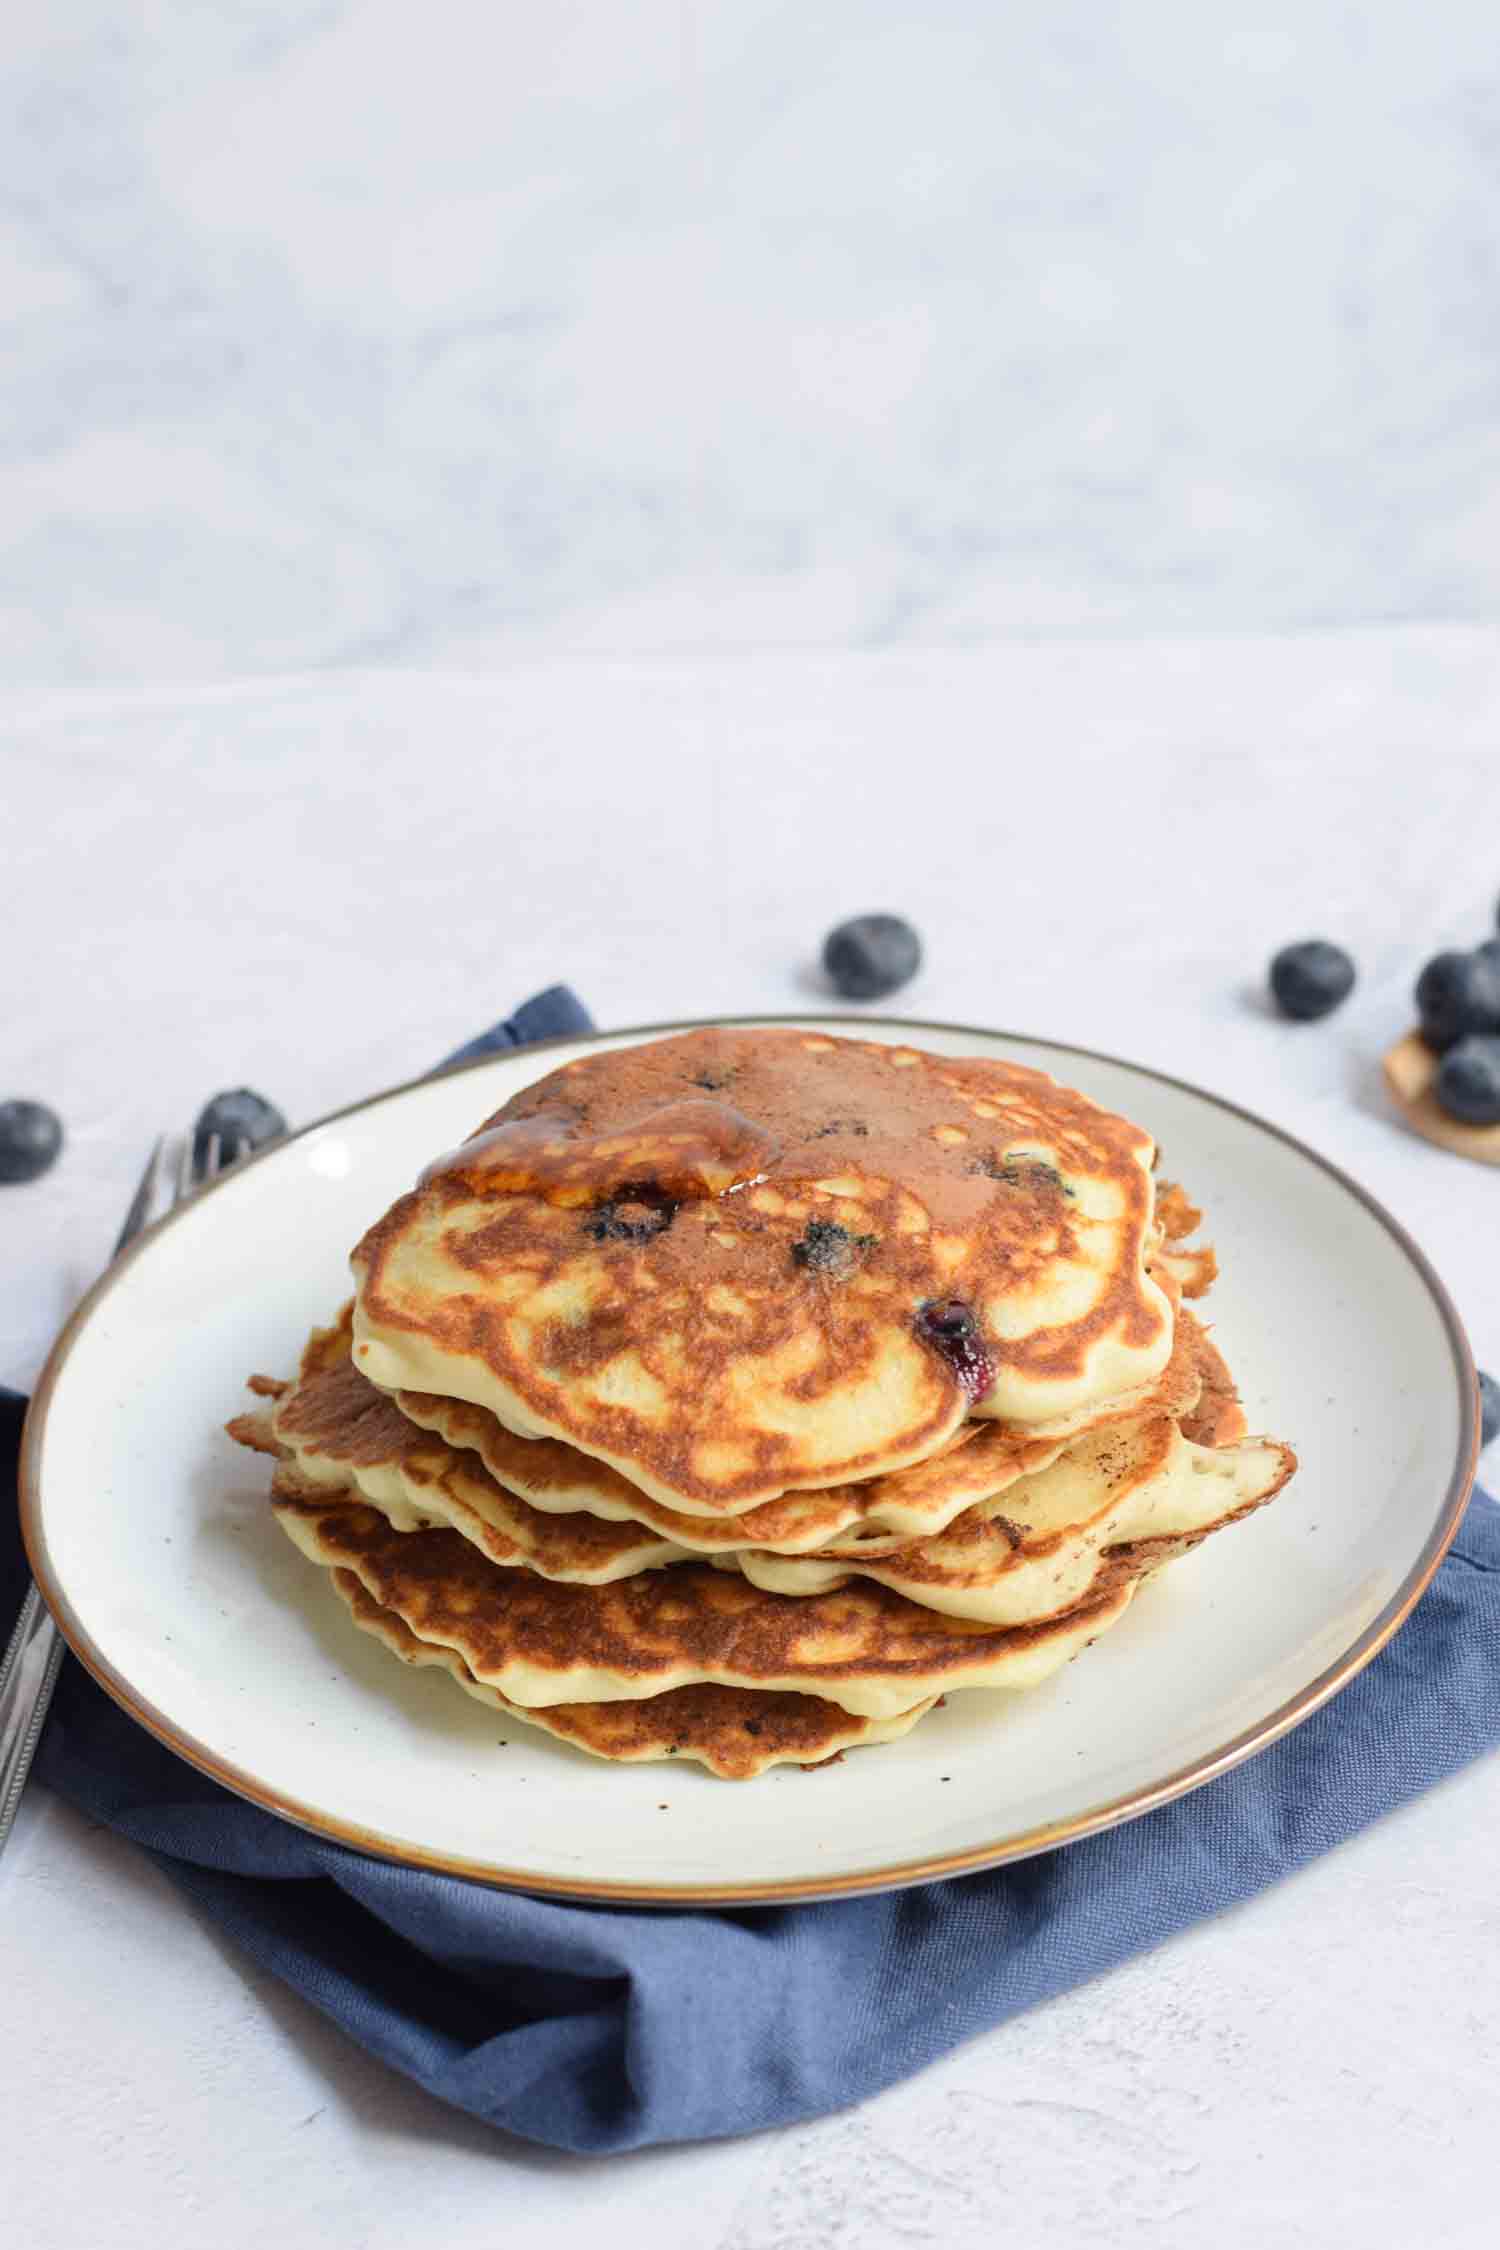 A stack of gluten-free American pancakes with blueberries on a plate